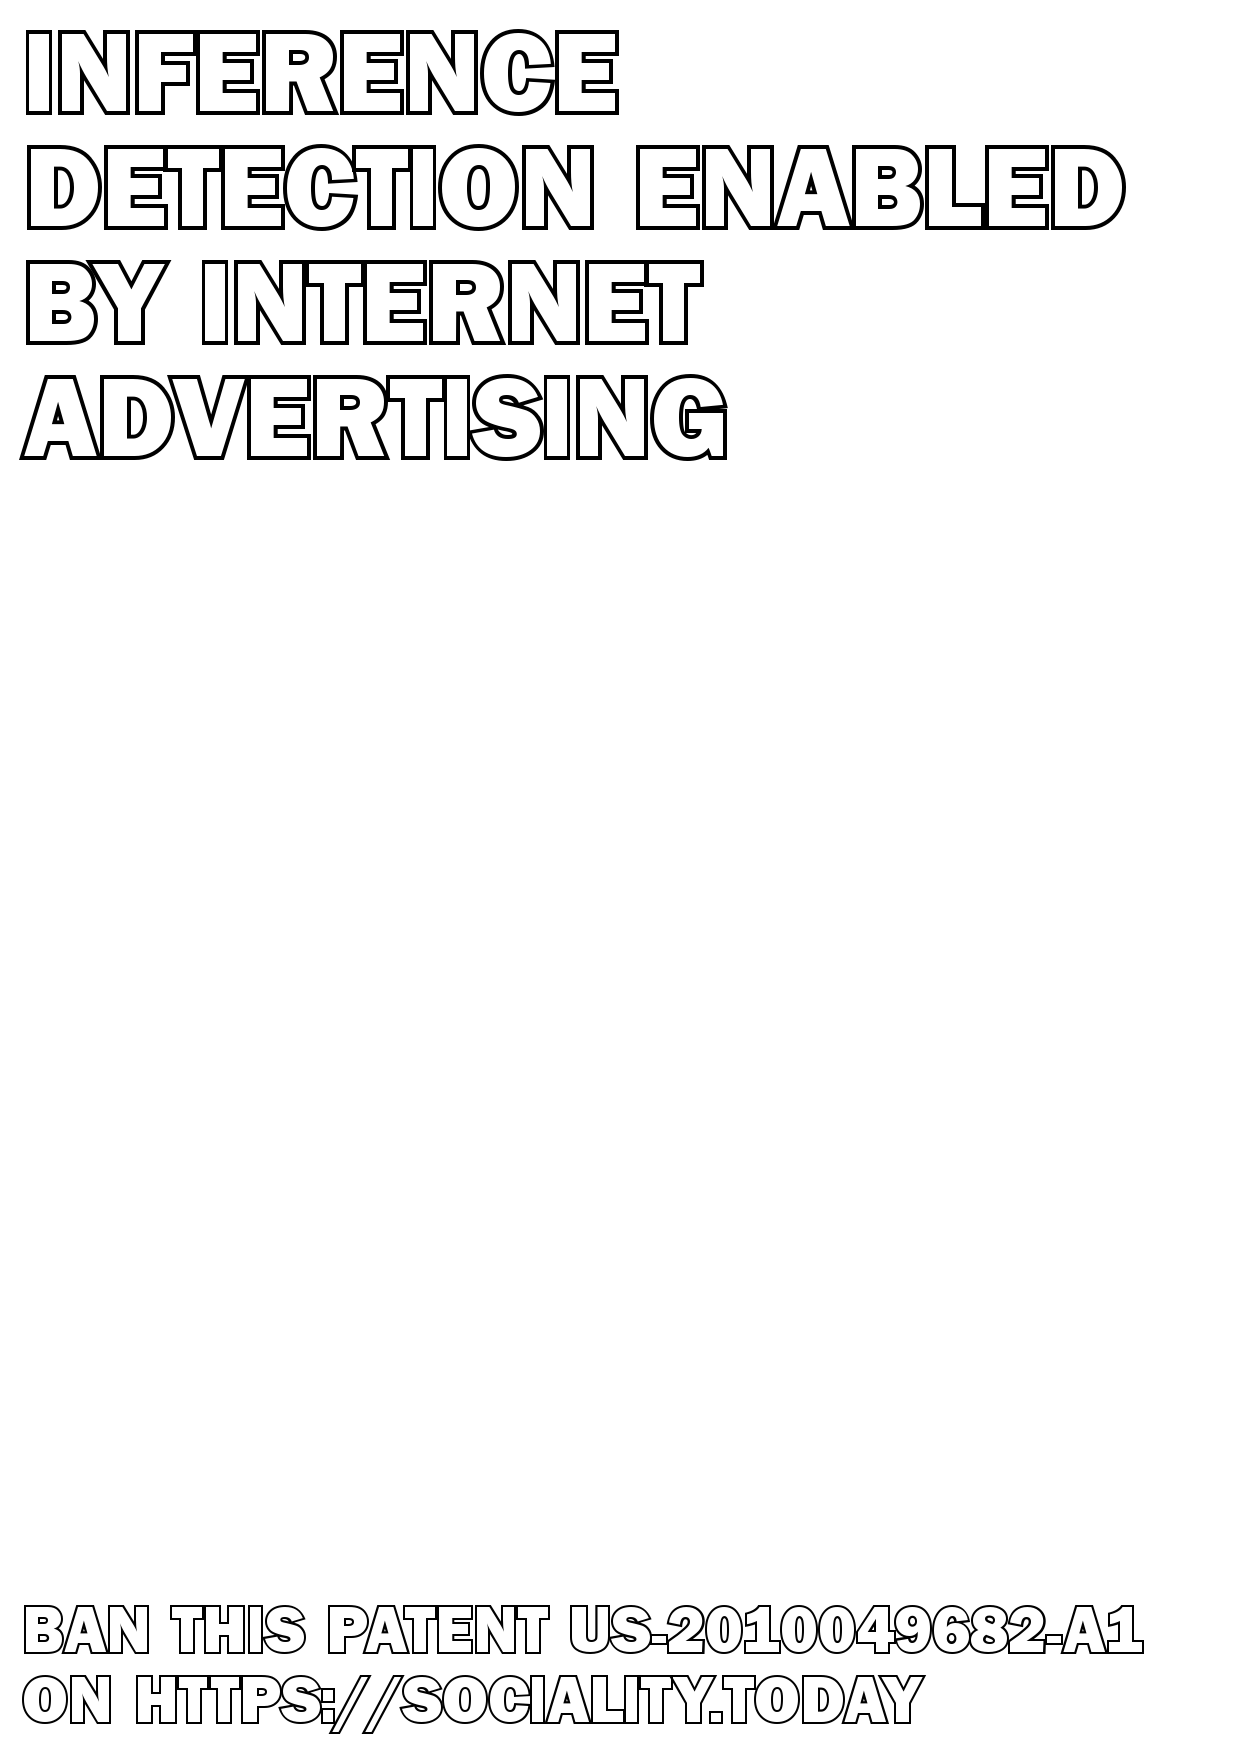 Inference detection enabled by internet advertising  - US-2010049682-A1